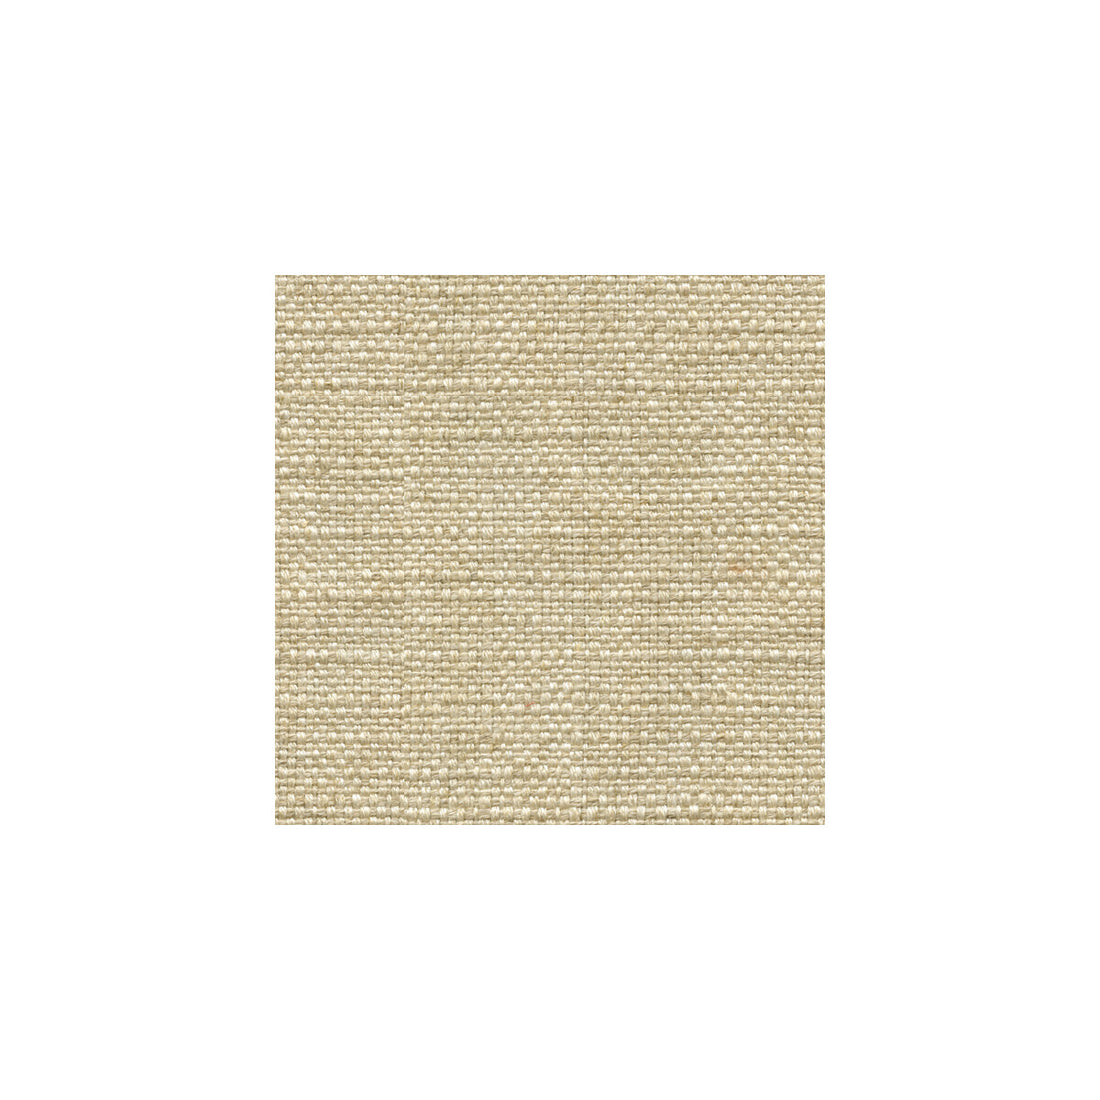 Corbeille fabric in naturel color - pattern 31924.1.0 - by Kravet Design in the Vie De Campagne collection